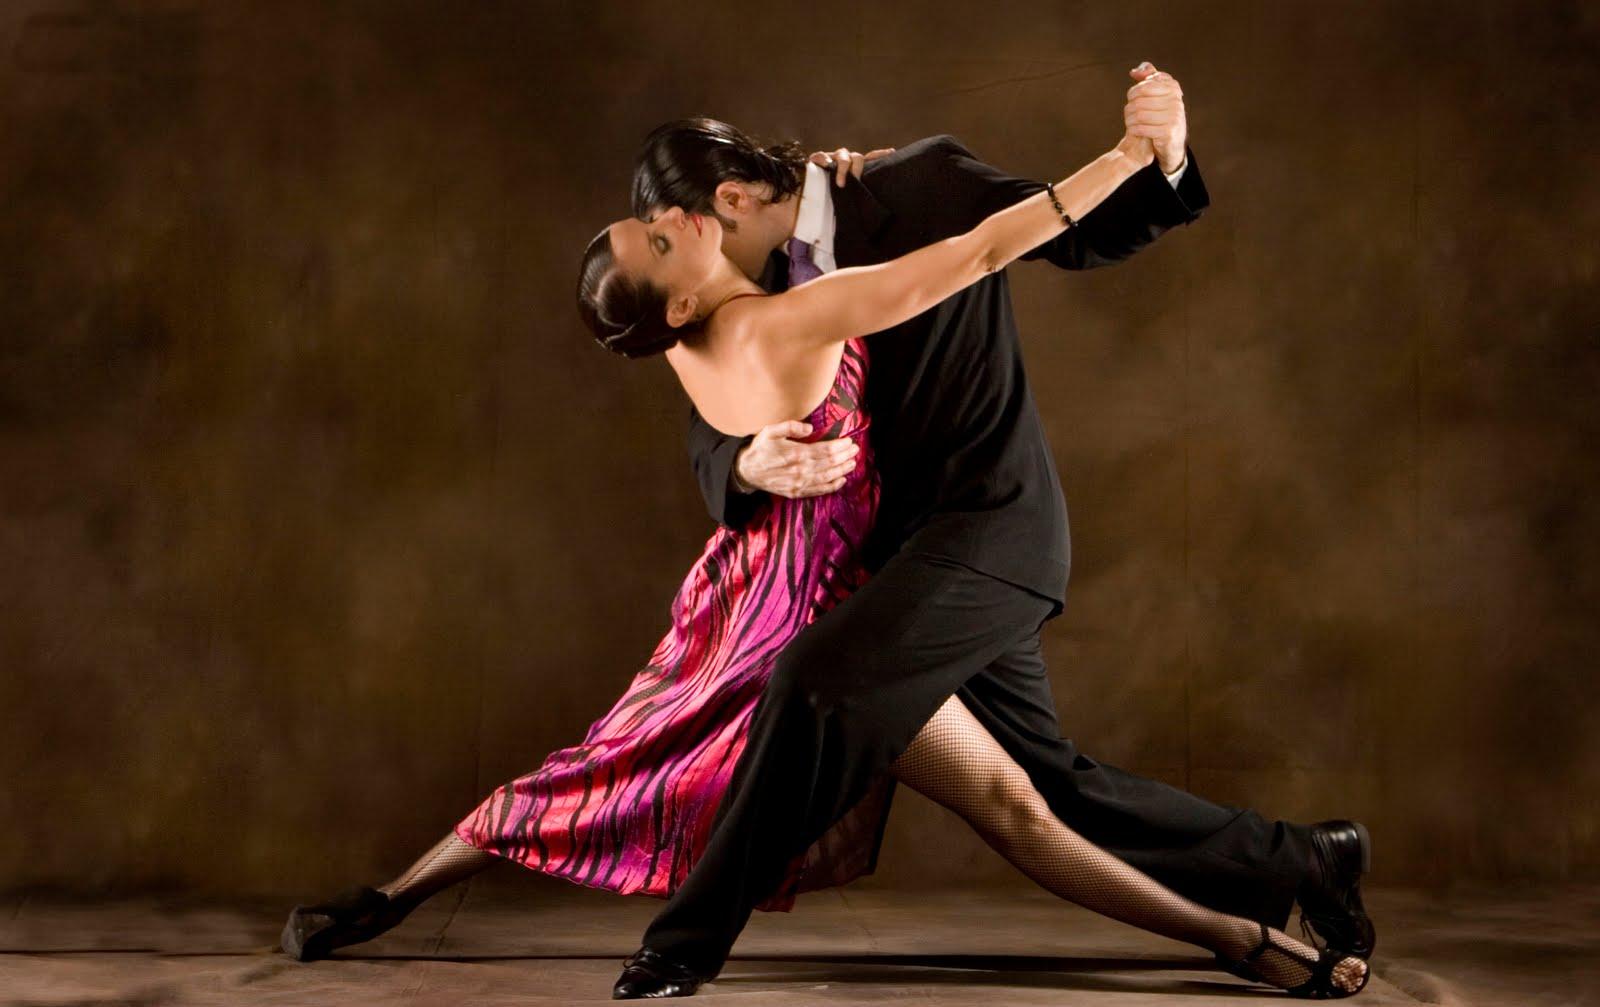 Is Dancing a Sport? Learn About the Different Types of Dance